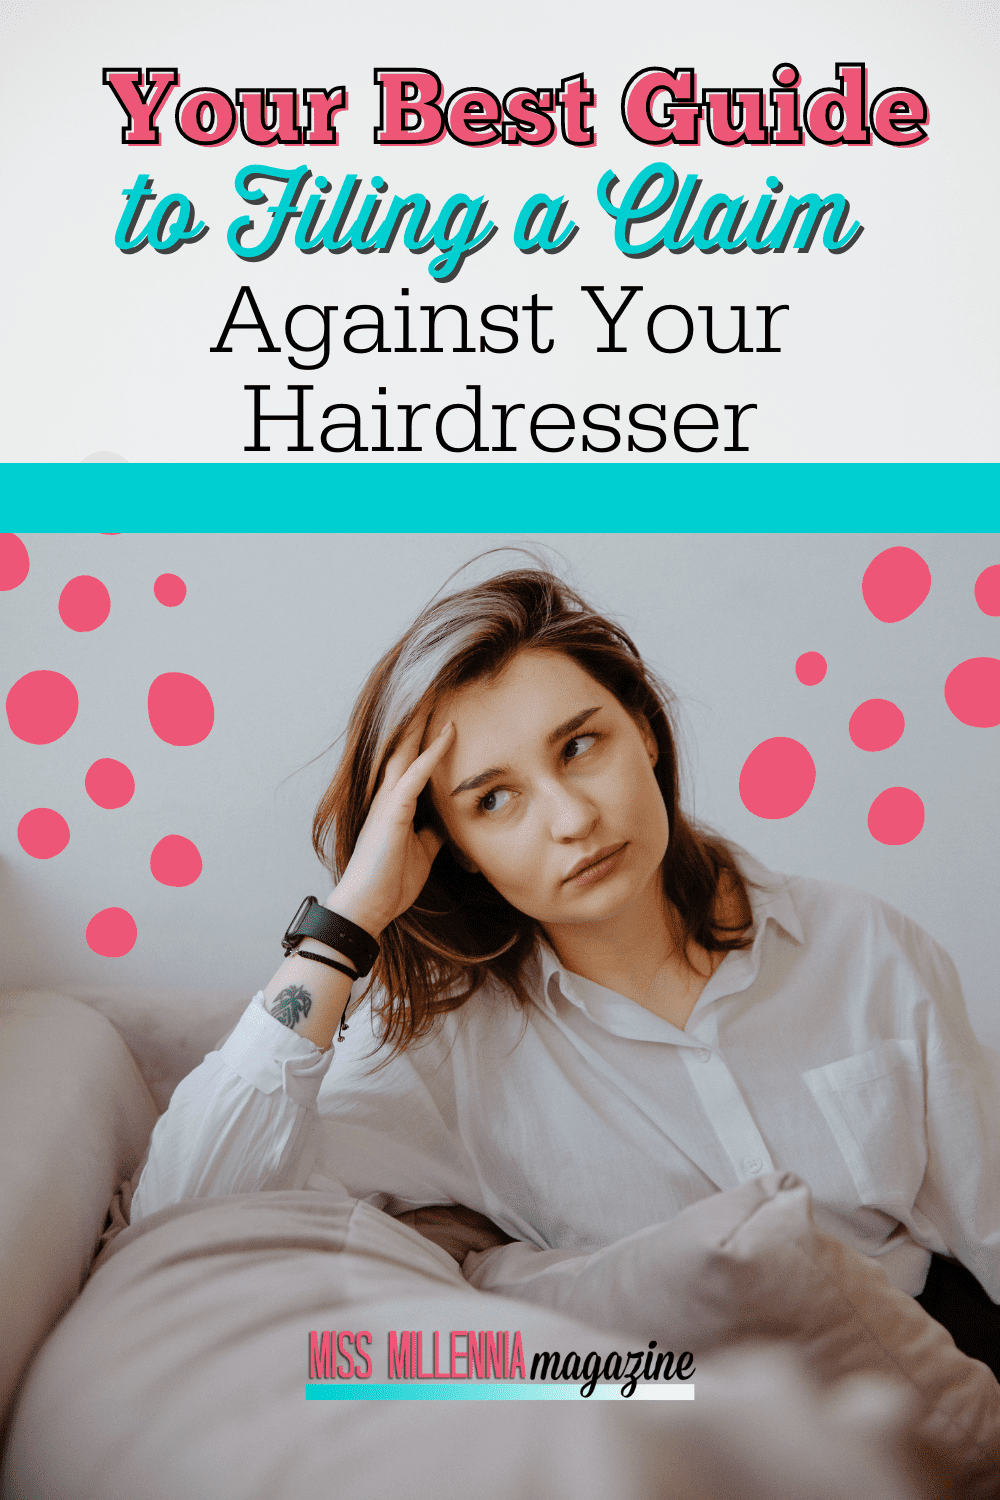 Your Best Guide to Filing a Claim Against Your Hairdresser